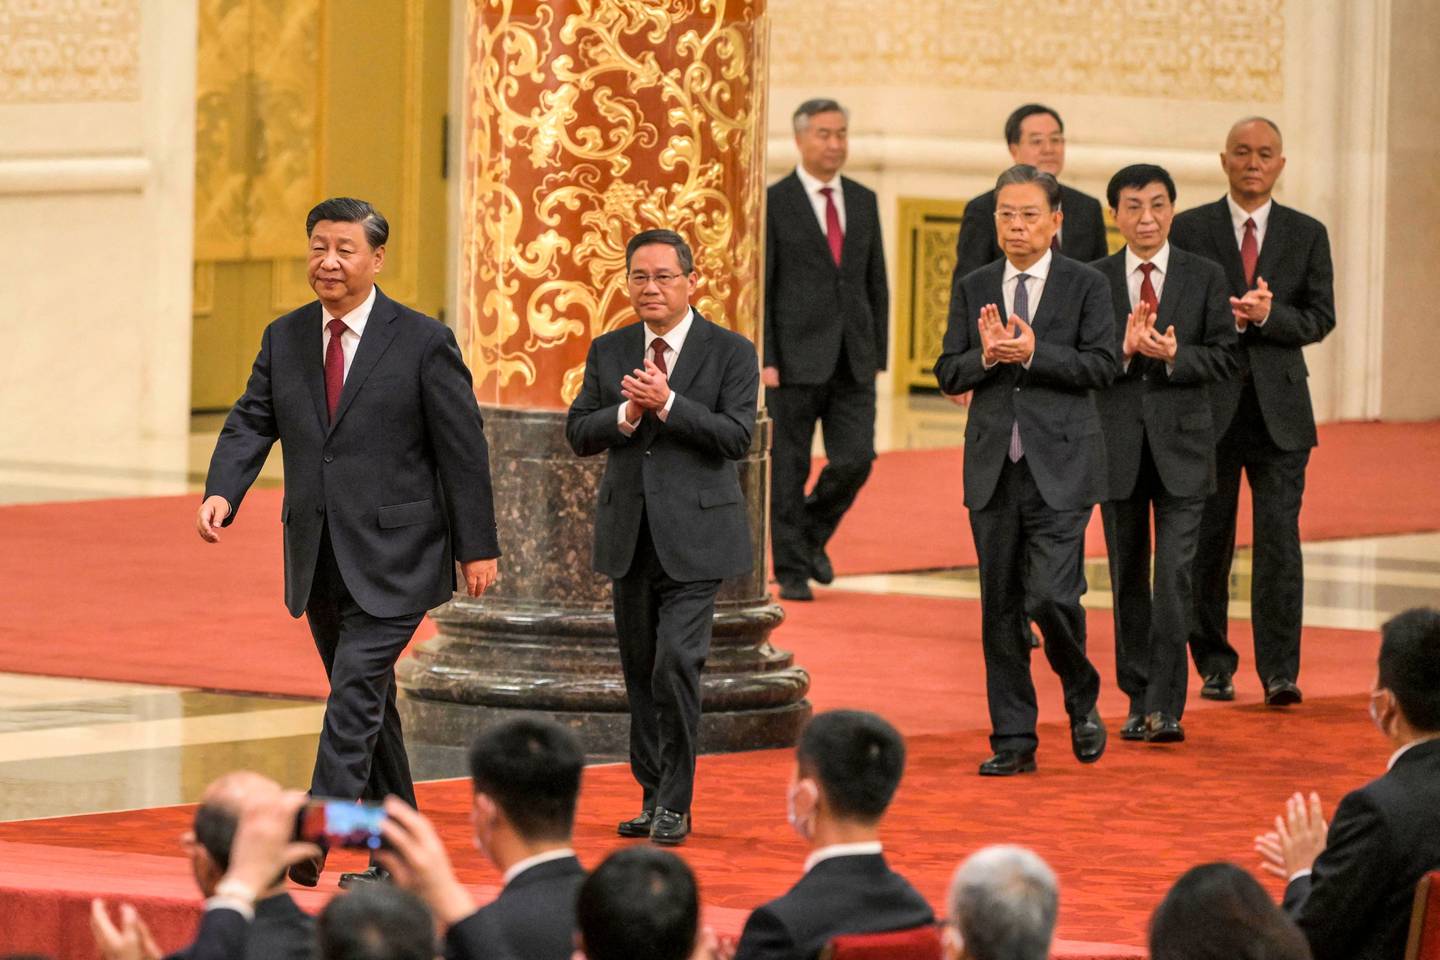 China's President Xi Jinping (L) walks with (2nd L to R) Li Qiang, Li Xi, Zhao Leji, Ding Xuexiang, Wang Huning and Cai Qi, members of the Chinese Communist Party's new Politburo Standing Committee, the nation's top decision-making body, as they meet the media in the Great Hall of the People in Beijing on October 23, 2022.  Photographer: Wang Zhao/AFP/Getty Images